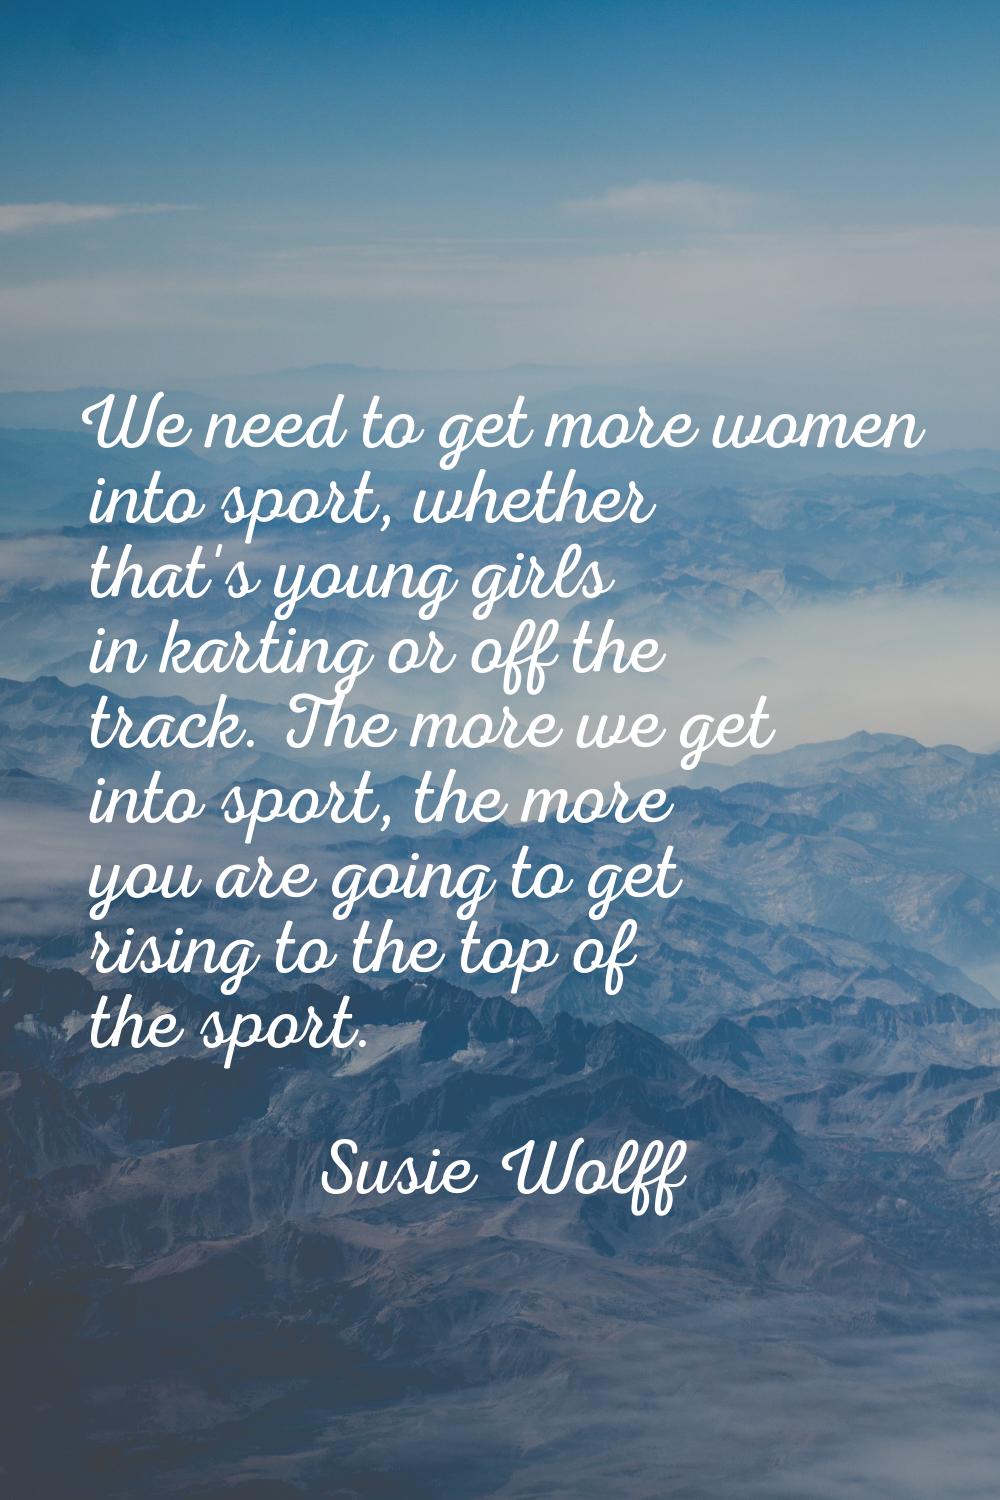 We need to get more women into sport, whether that's young girls in karting or off the track. The m